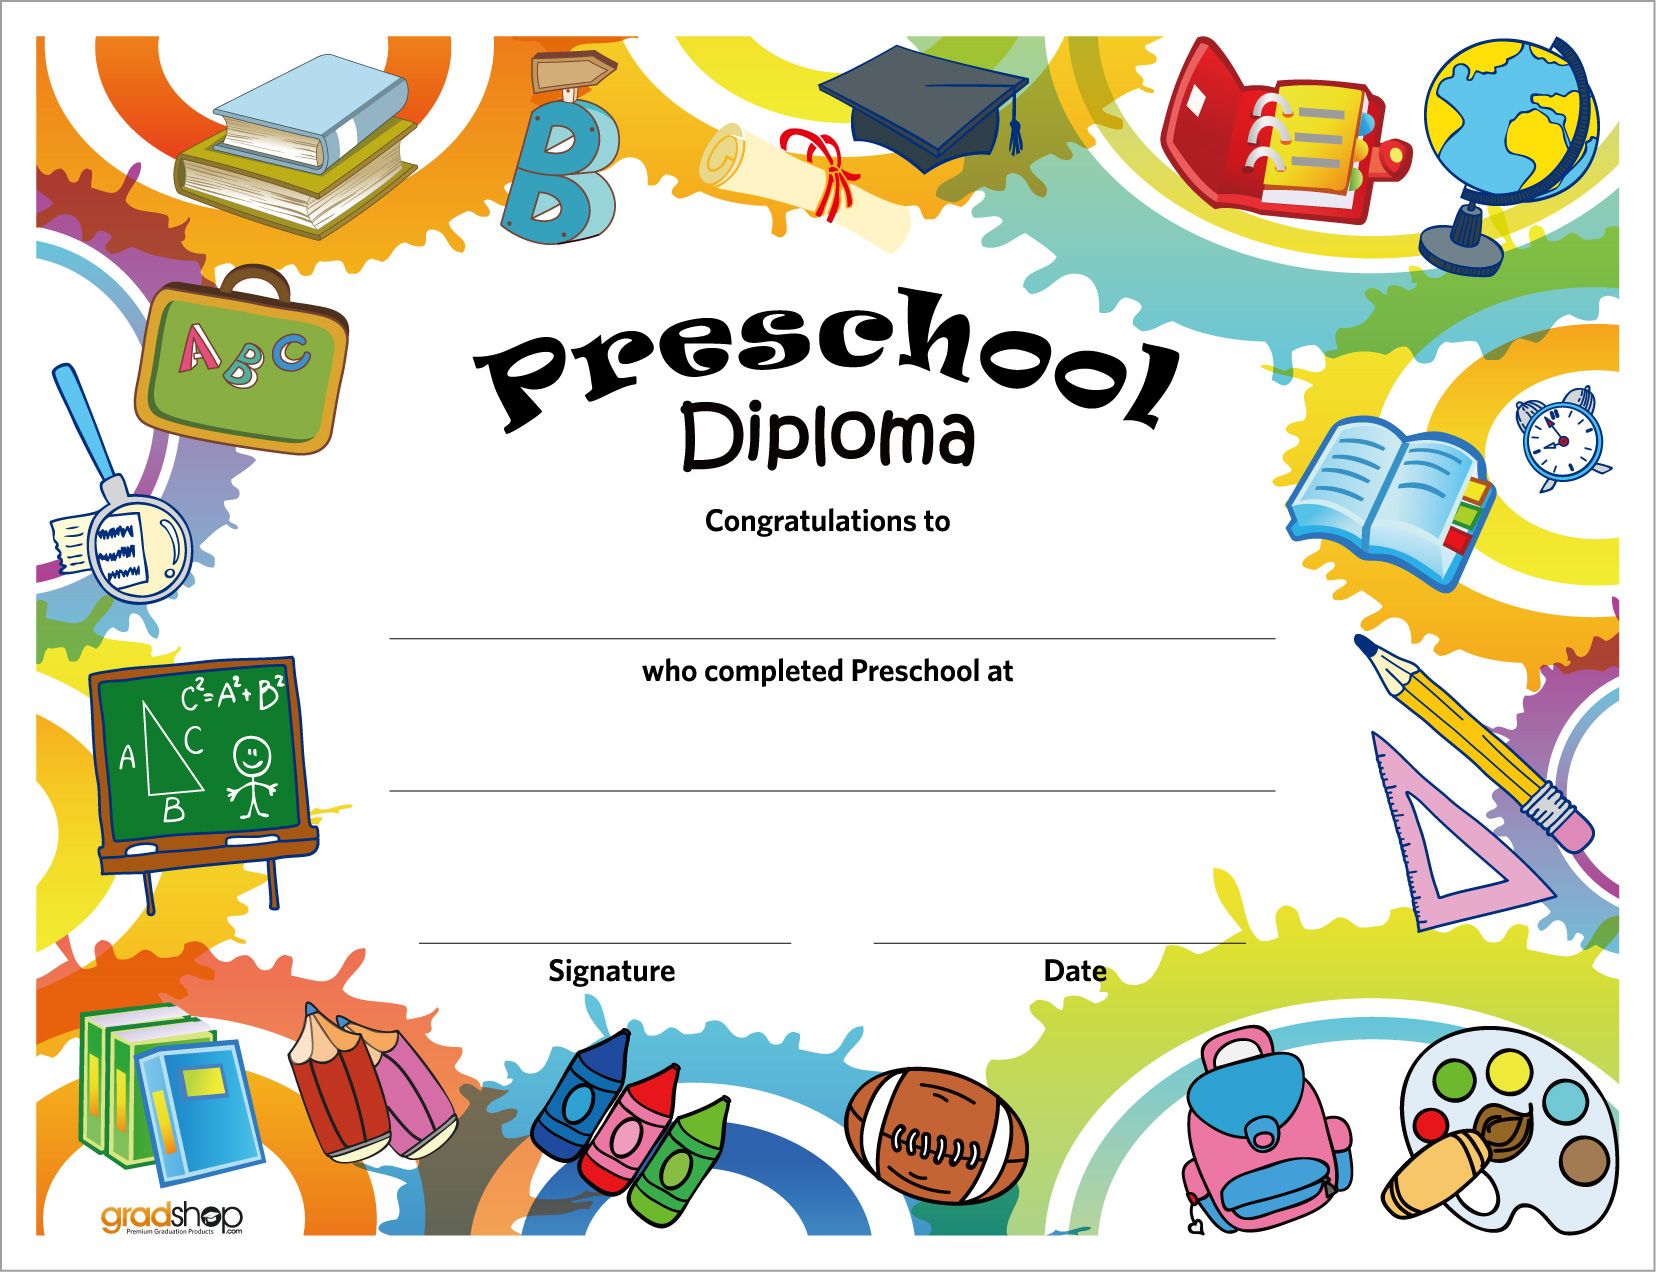 Preschool border - about diplomas on colleges thanksgiving